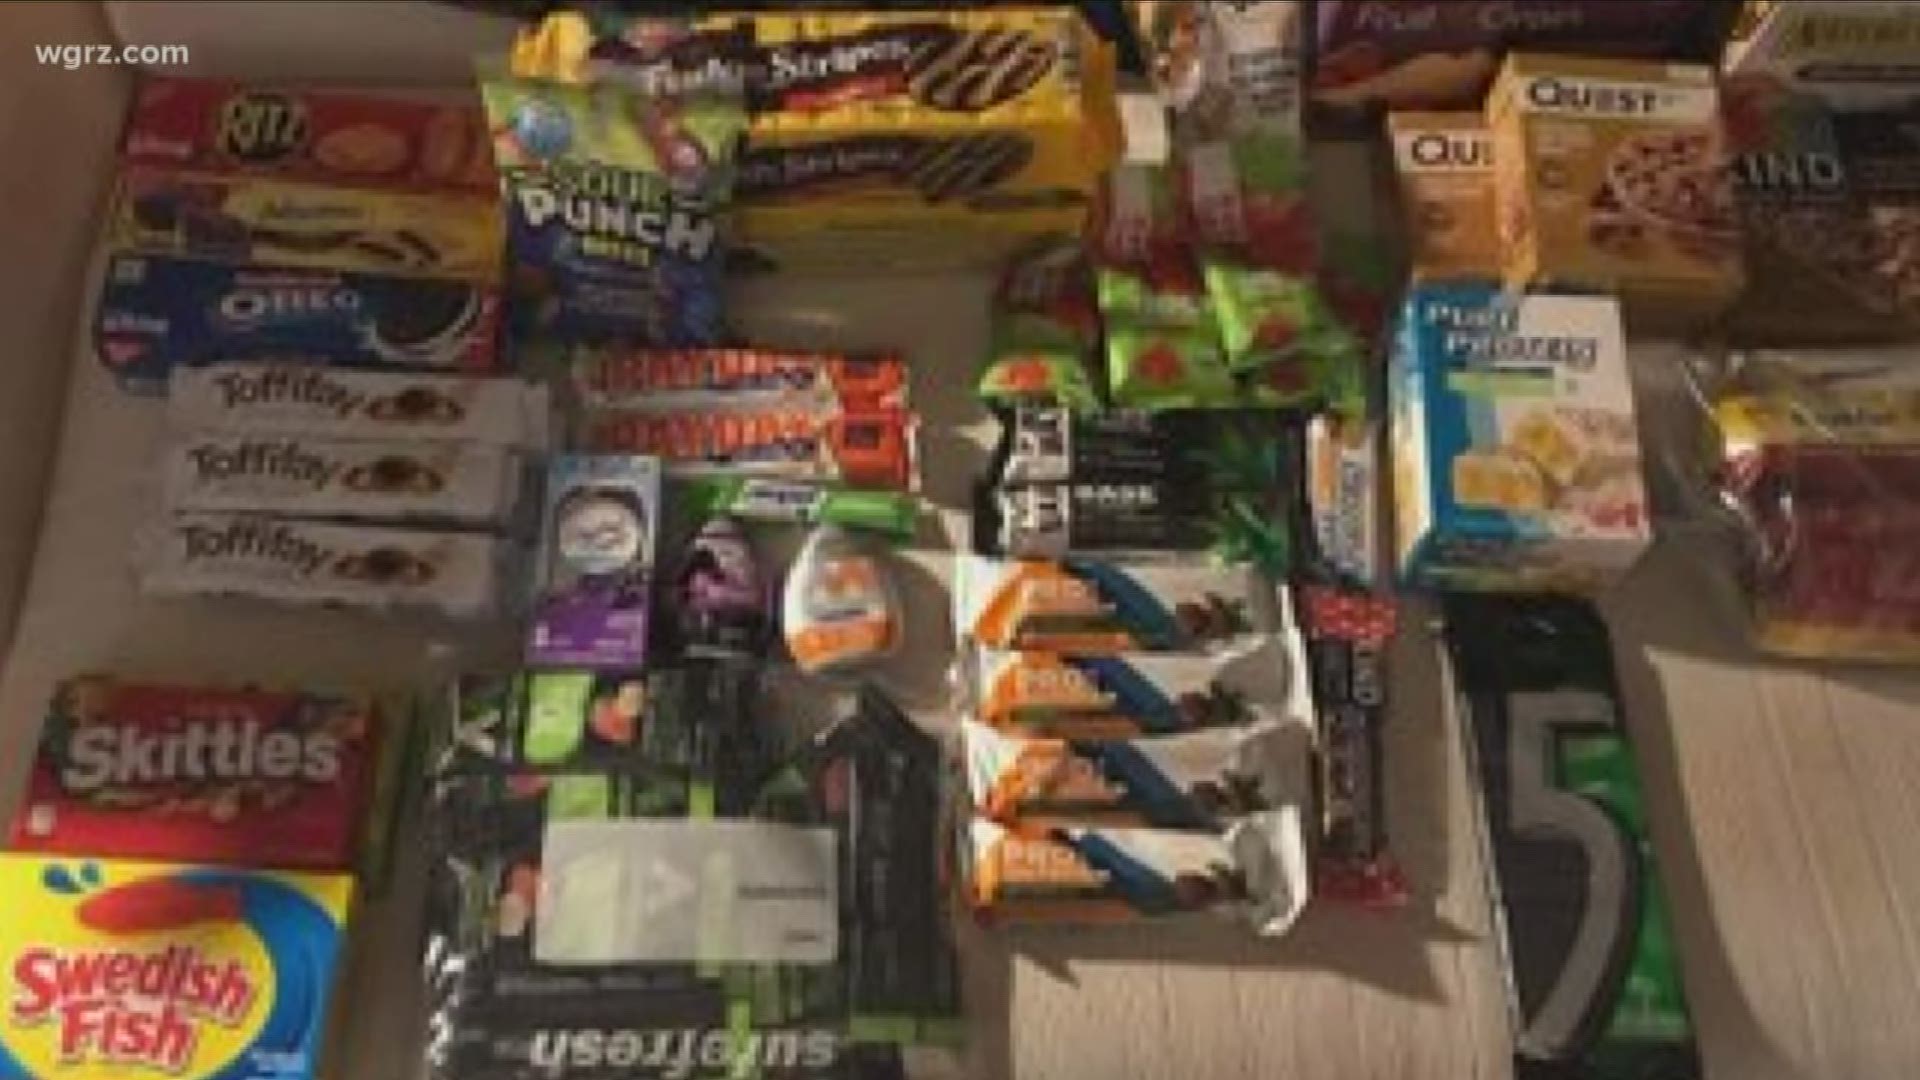 Joanie Dolan asked for donations to help national guard. These pictures show the response. Piles of candy and toiletries people have donated in the last two days.